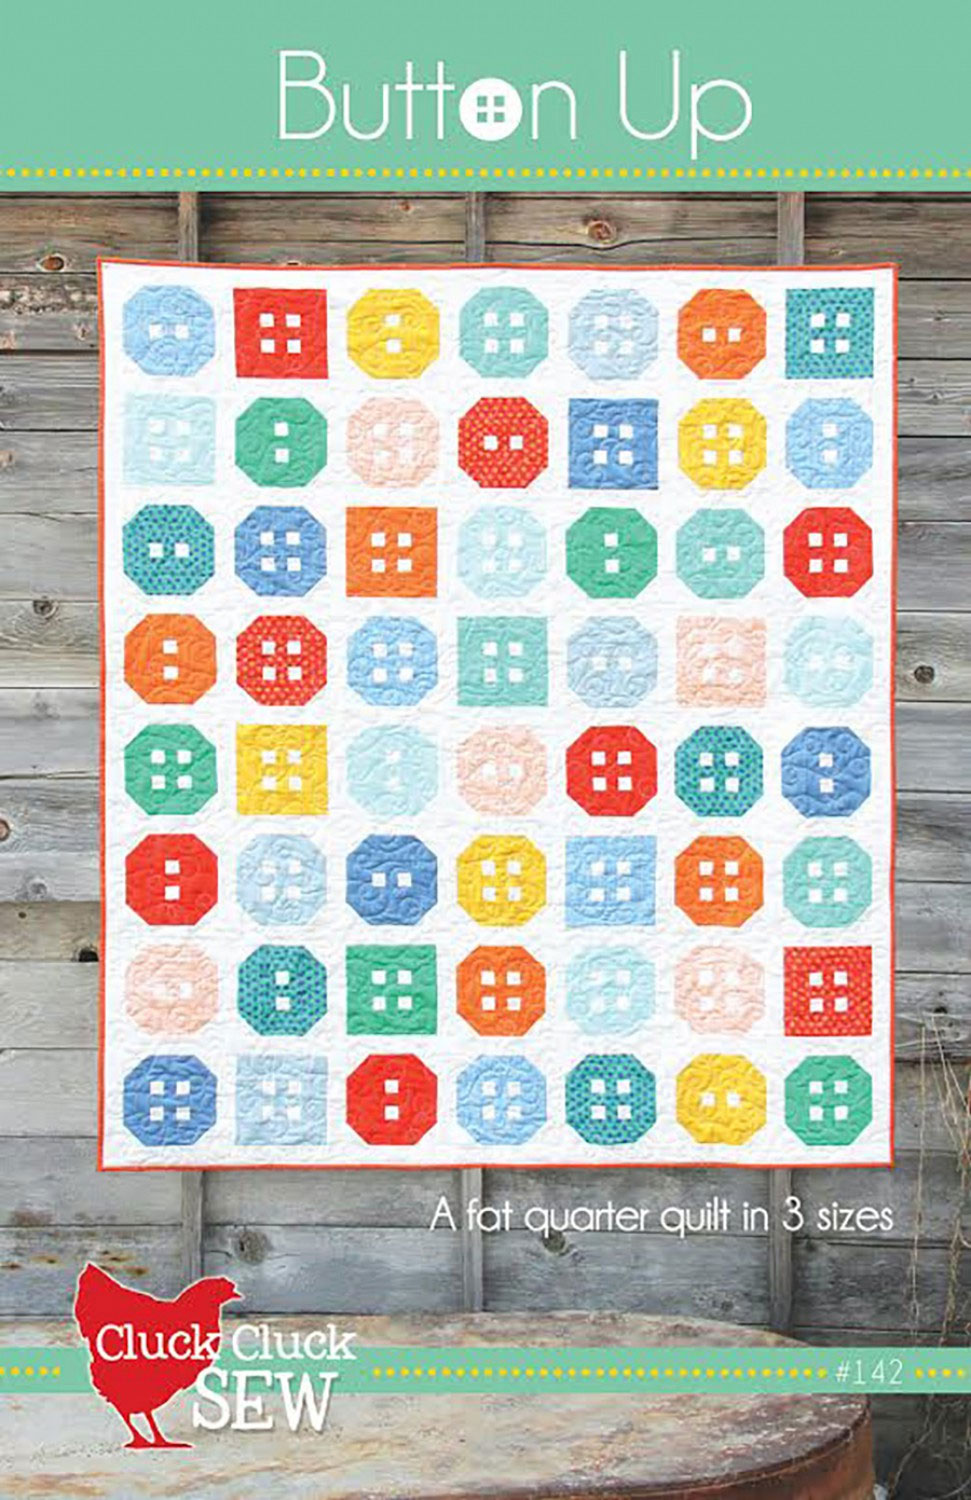 Button-Up-quilt-sewing-pattern-Cluck-Cluck-Sew-front